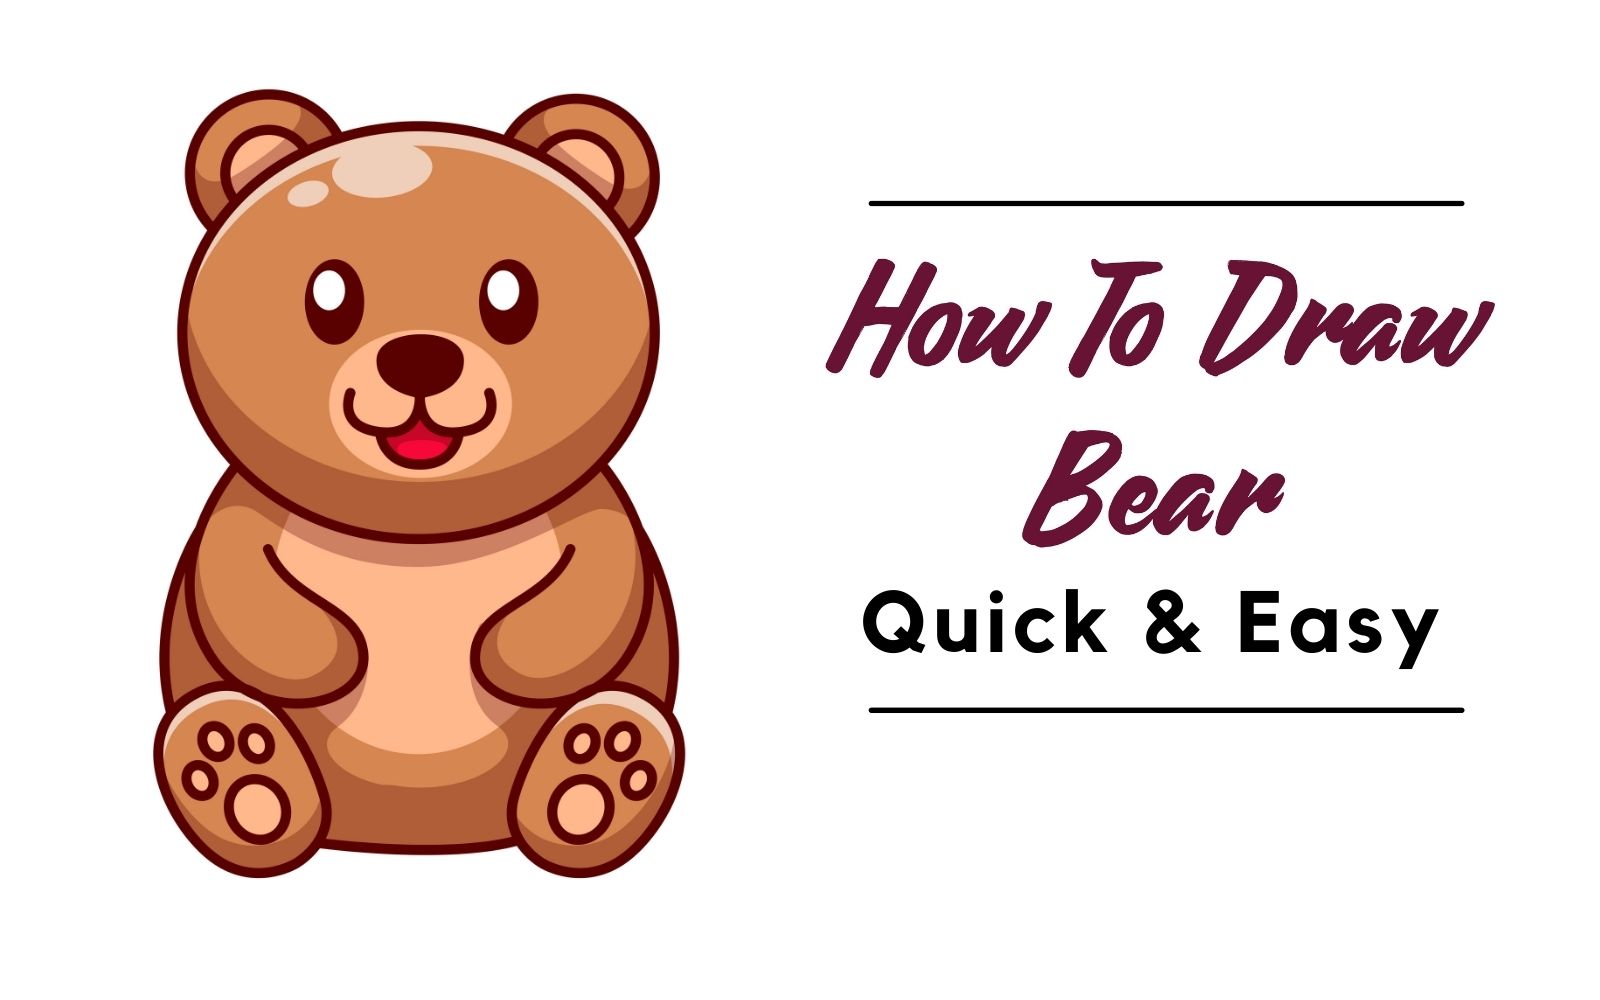 How to Draw a Bear: Easy Step-by-Step Bear Drawing [With Video]